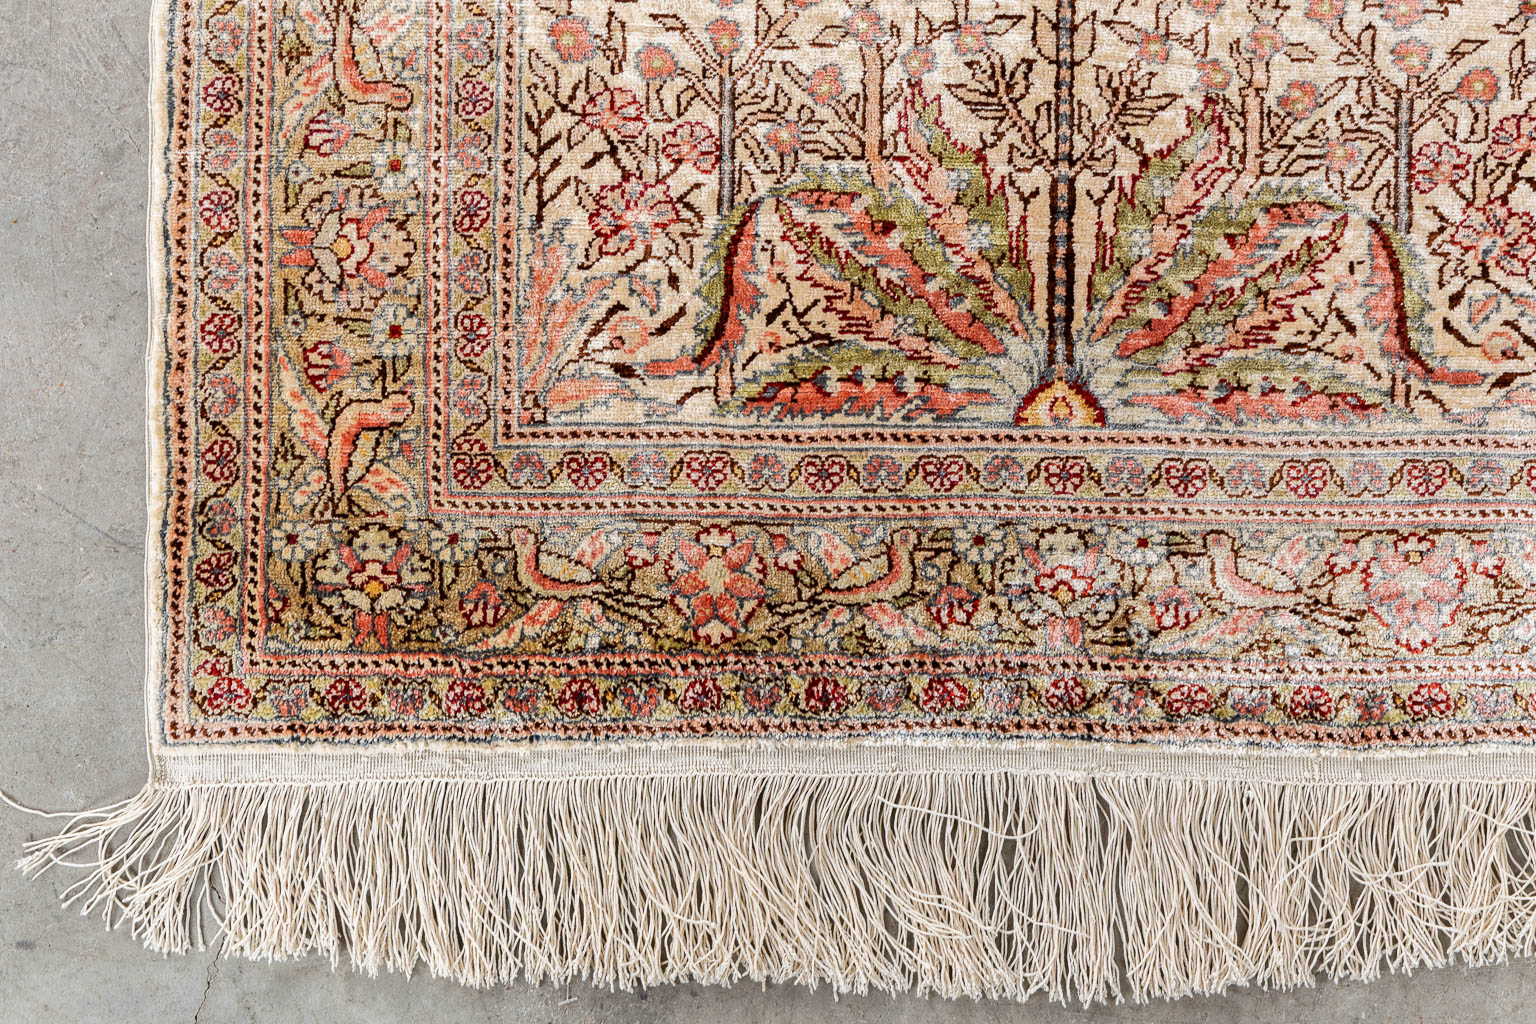 An Oriental hand-made carpet with 